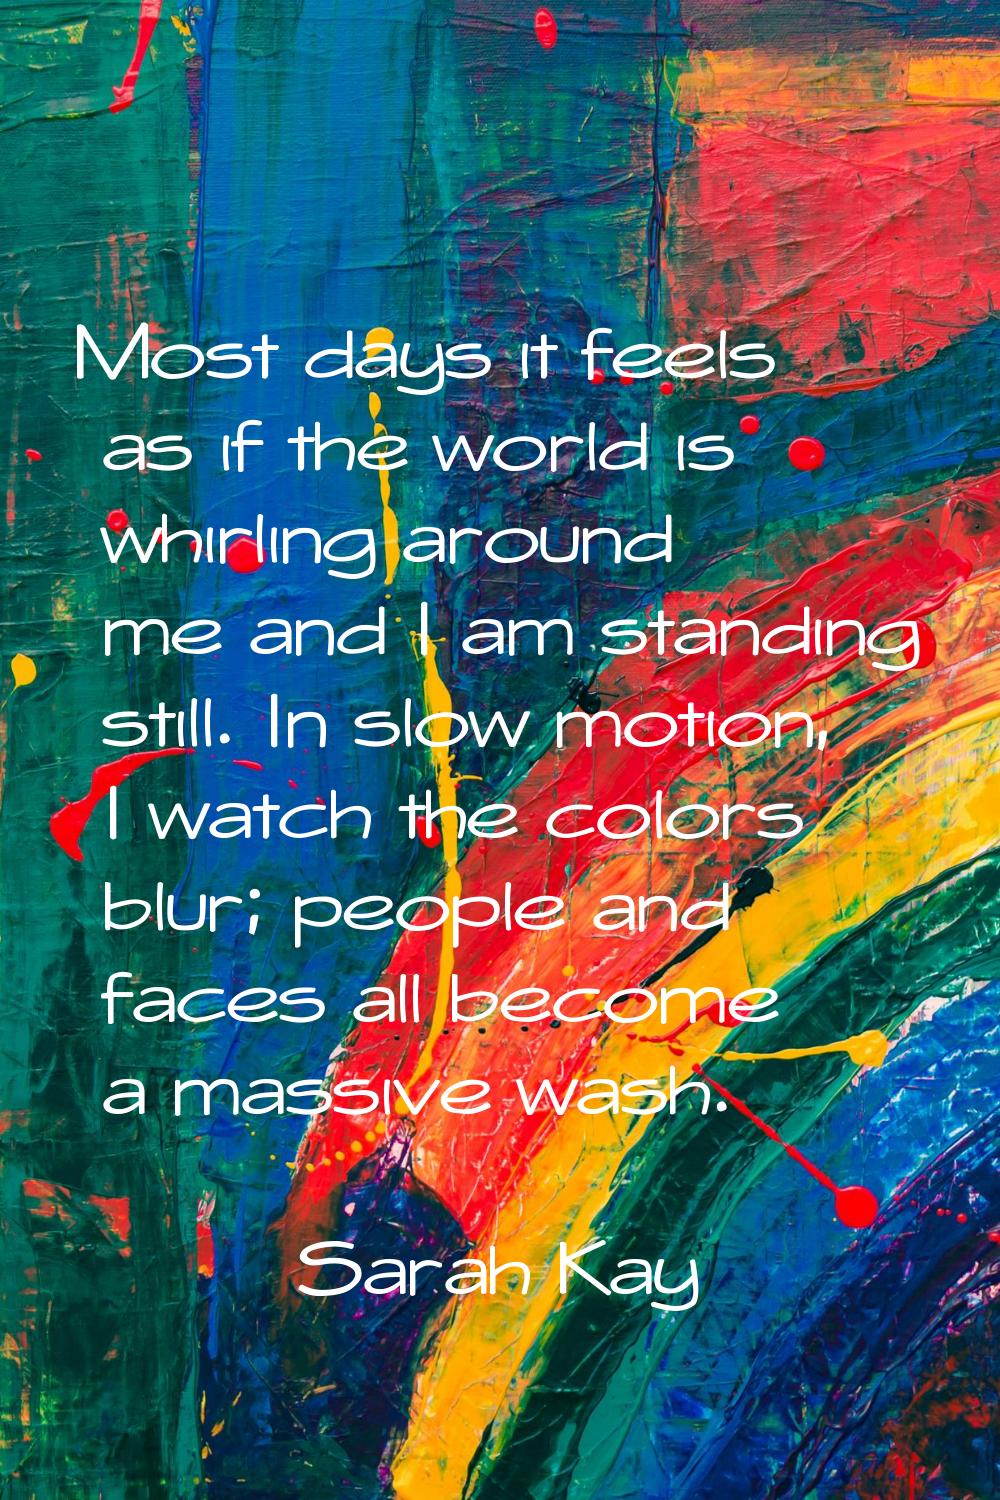 Most days it feels as if the world is whirling around me and I am standing still. In slow motion, I